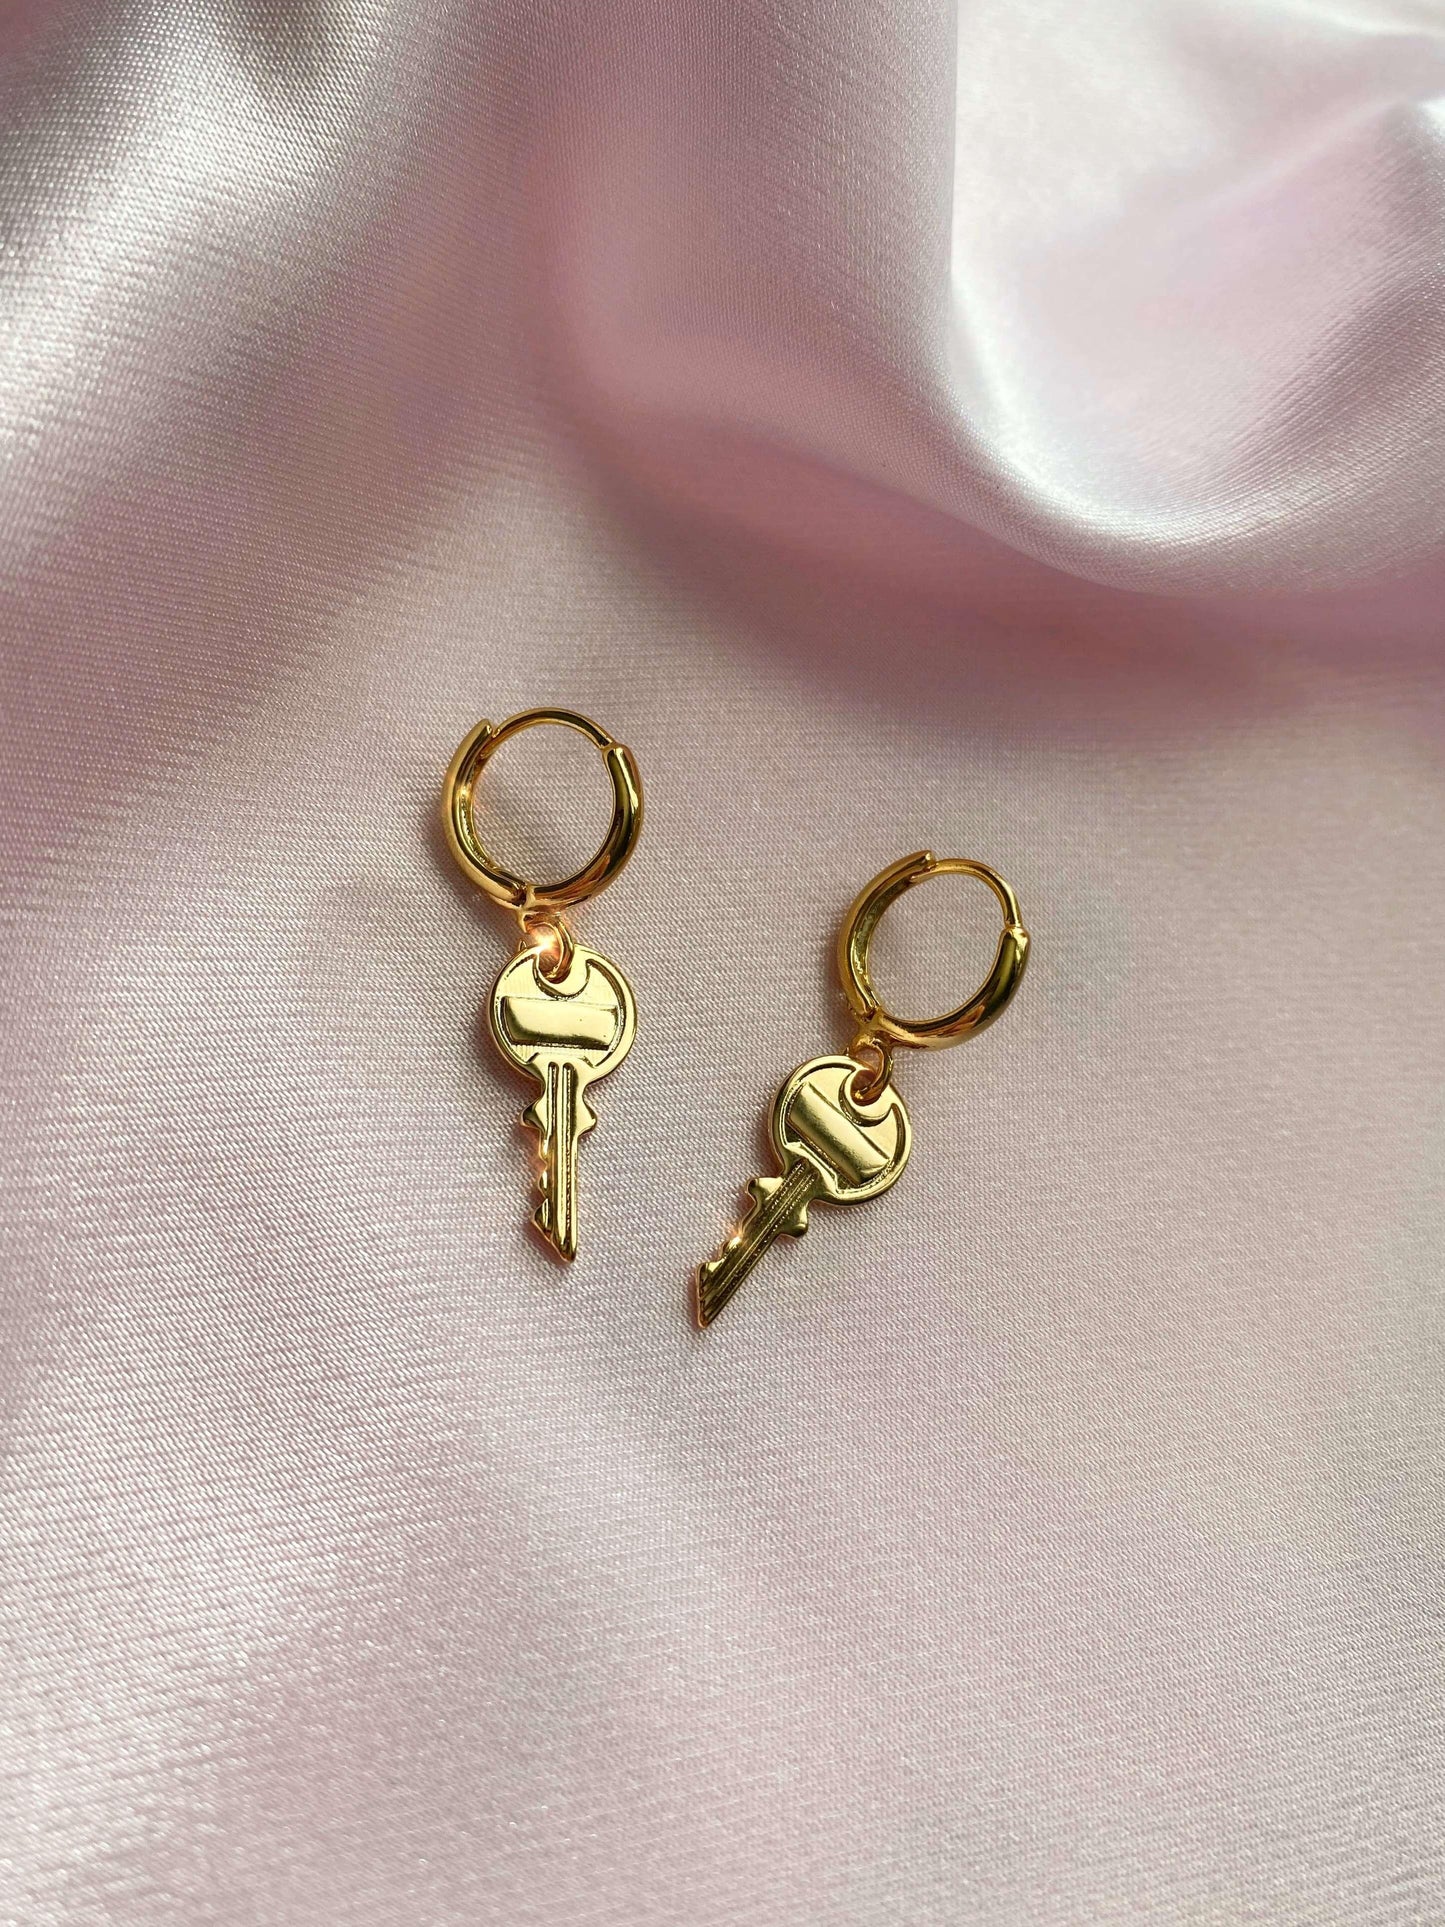 Silver And 18ct Gold Plated Lock And Key Earrings By Hurleyburley